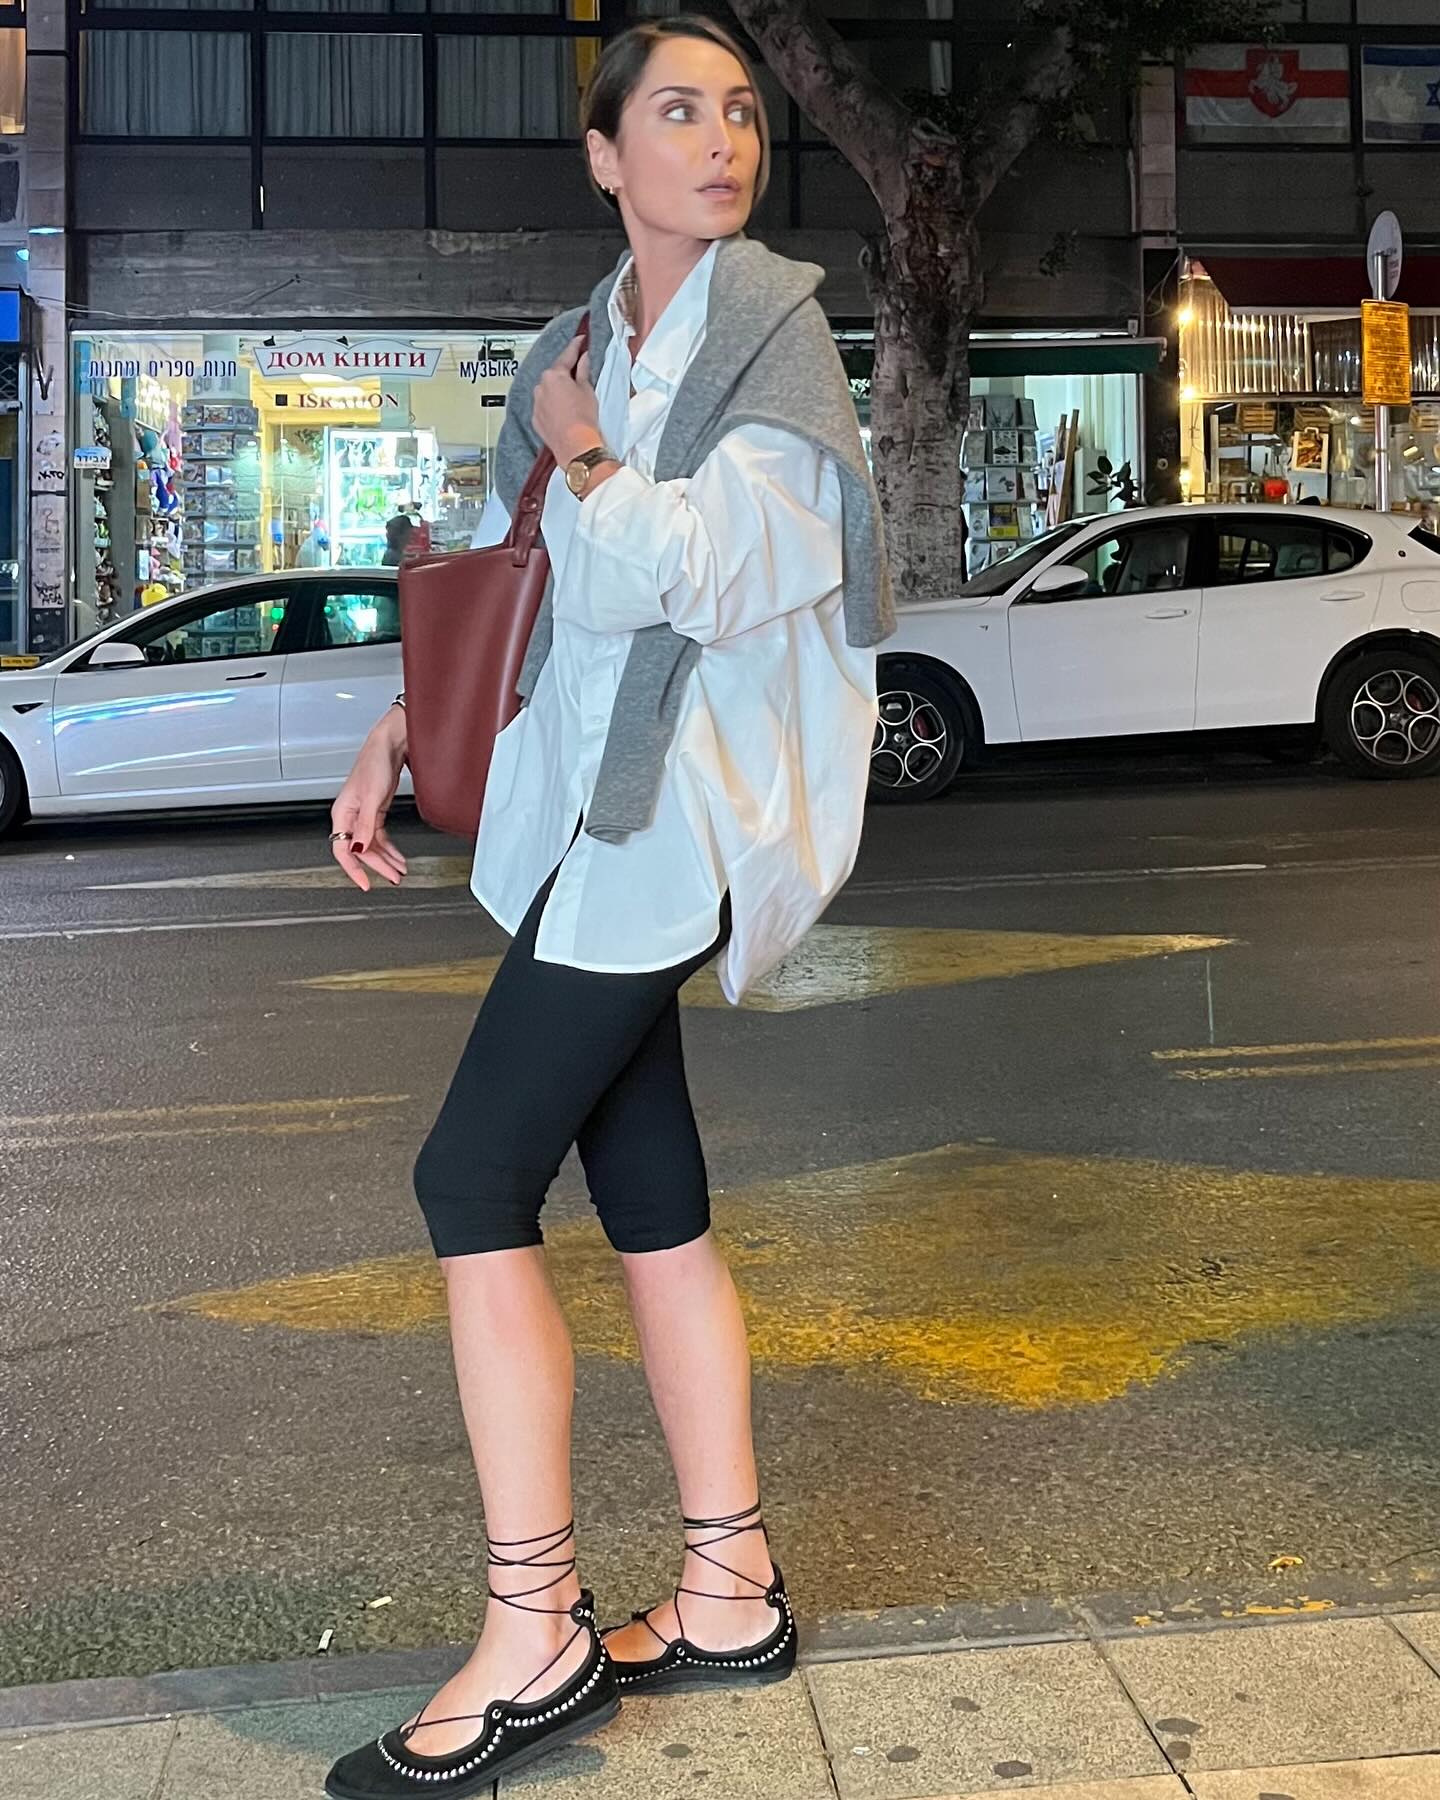 influencer Géraldine Boublil poses on a city sidewalk wearing an oversize white button-down shirt, a sweater draped over her shoulders, brown tote bag, black capri pants, and black lace-up flats